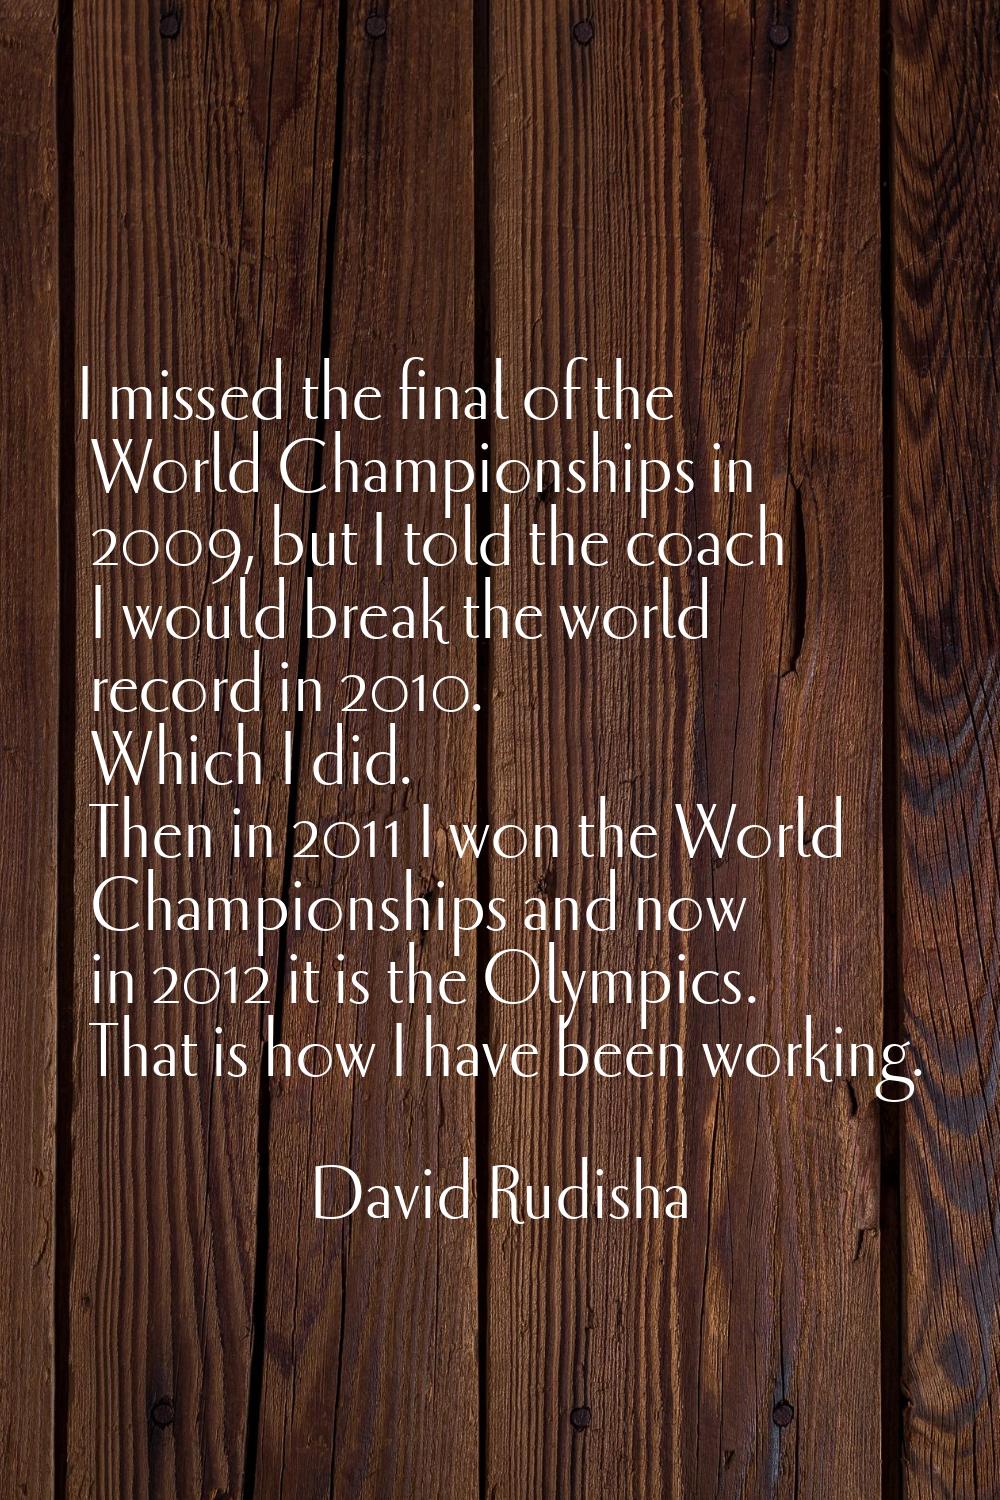 I missed the final of the World Championships in 2009, but I told the coach I would break the world